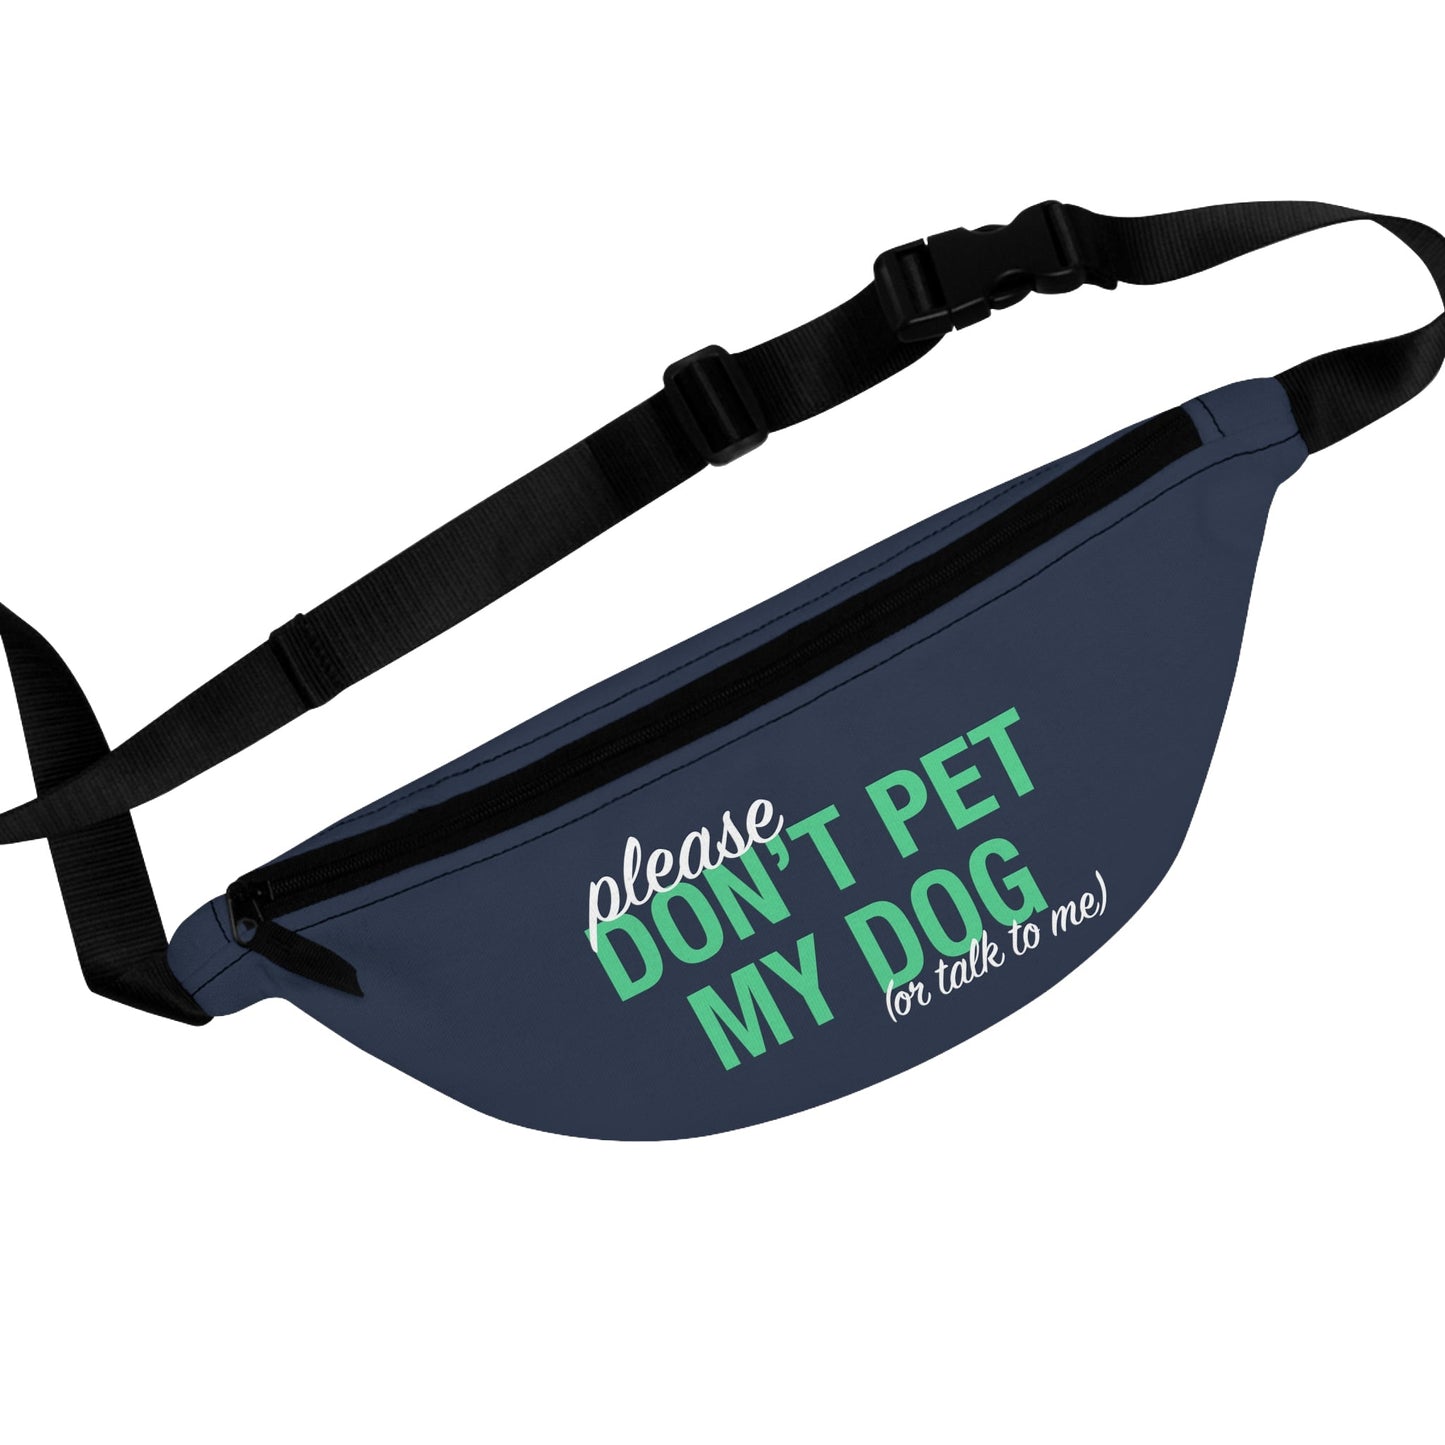 Please Don't Pet My Dog (Or Talk To Me) | Treat Pouch - Detezi Designs-11669688796807011072